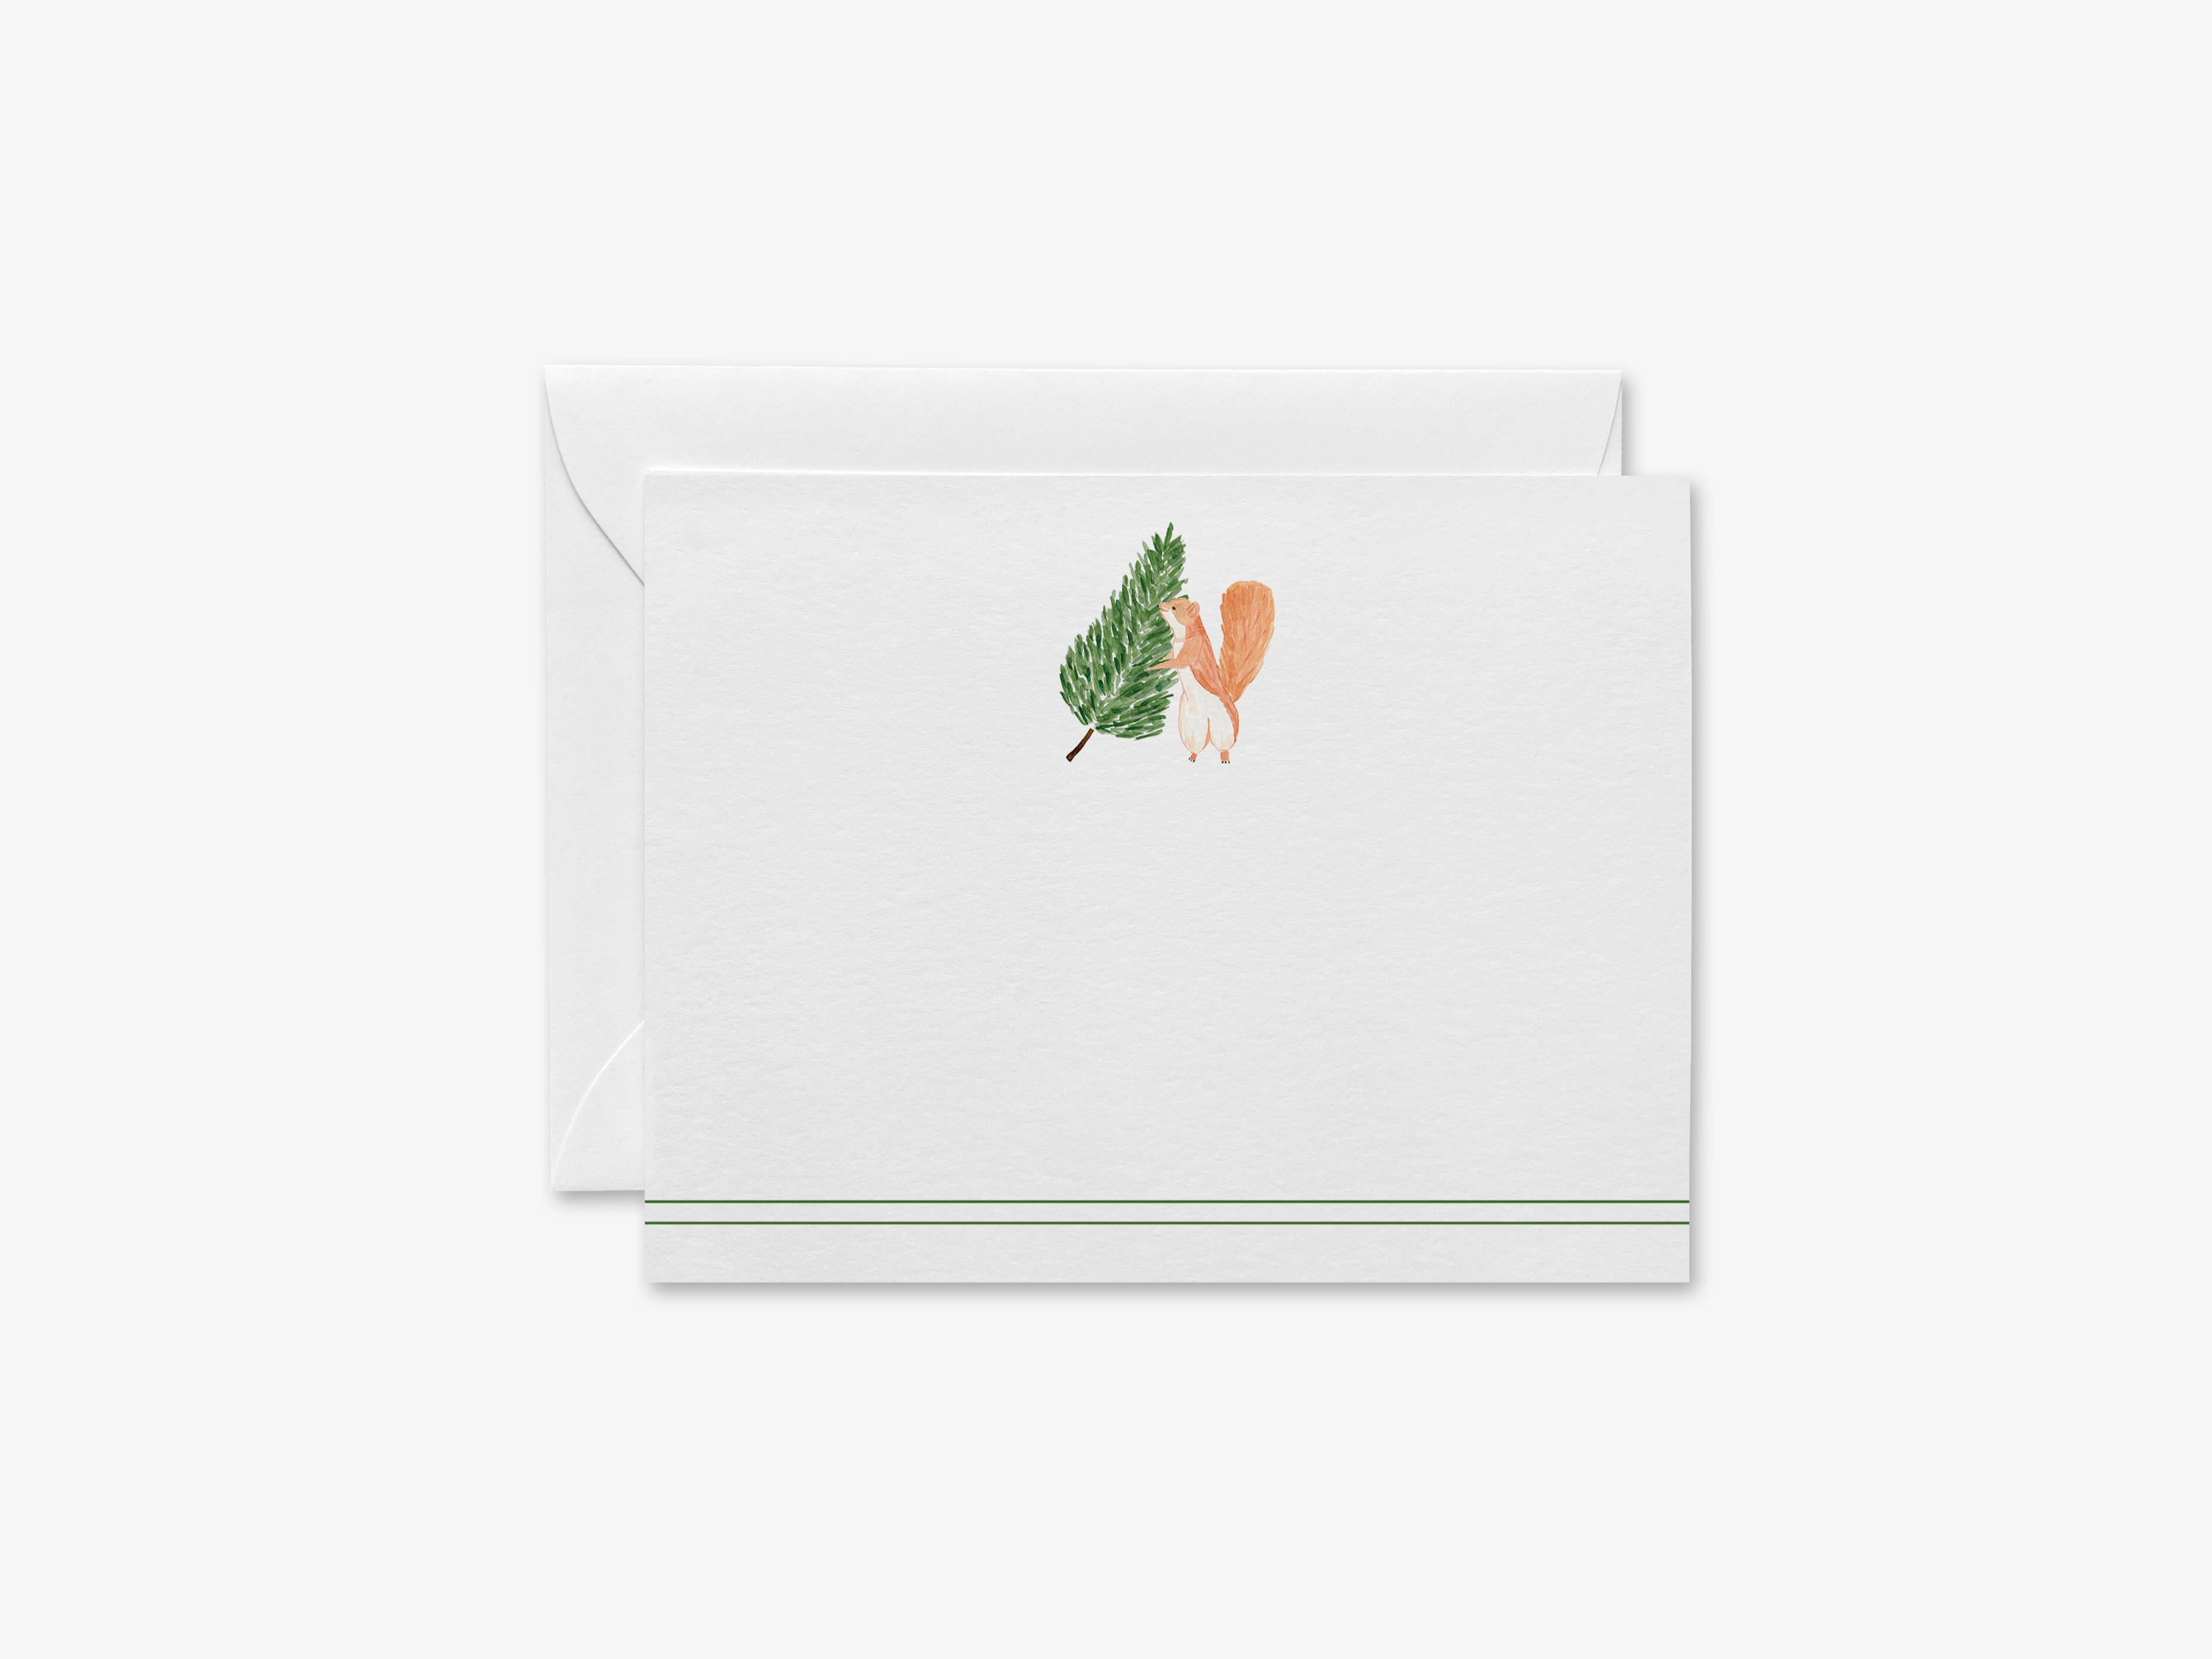 Tree Squirrel Flat Notes [Sets of 8]-These flat notecards are 4.25x5.5 and feature our hand-painted watercolor evergreen tree and squirrel, printed in the USA on 120lb textured stock. They come with white envelopes and make great thank yous and gifts for the animal lover in your life.-The Singing Little Bird